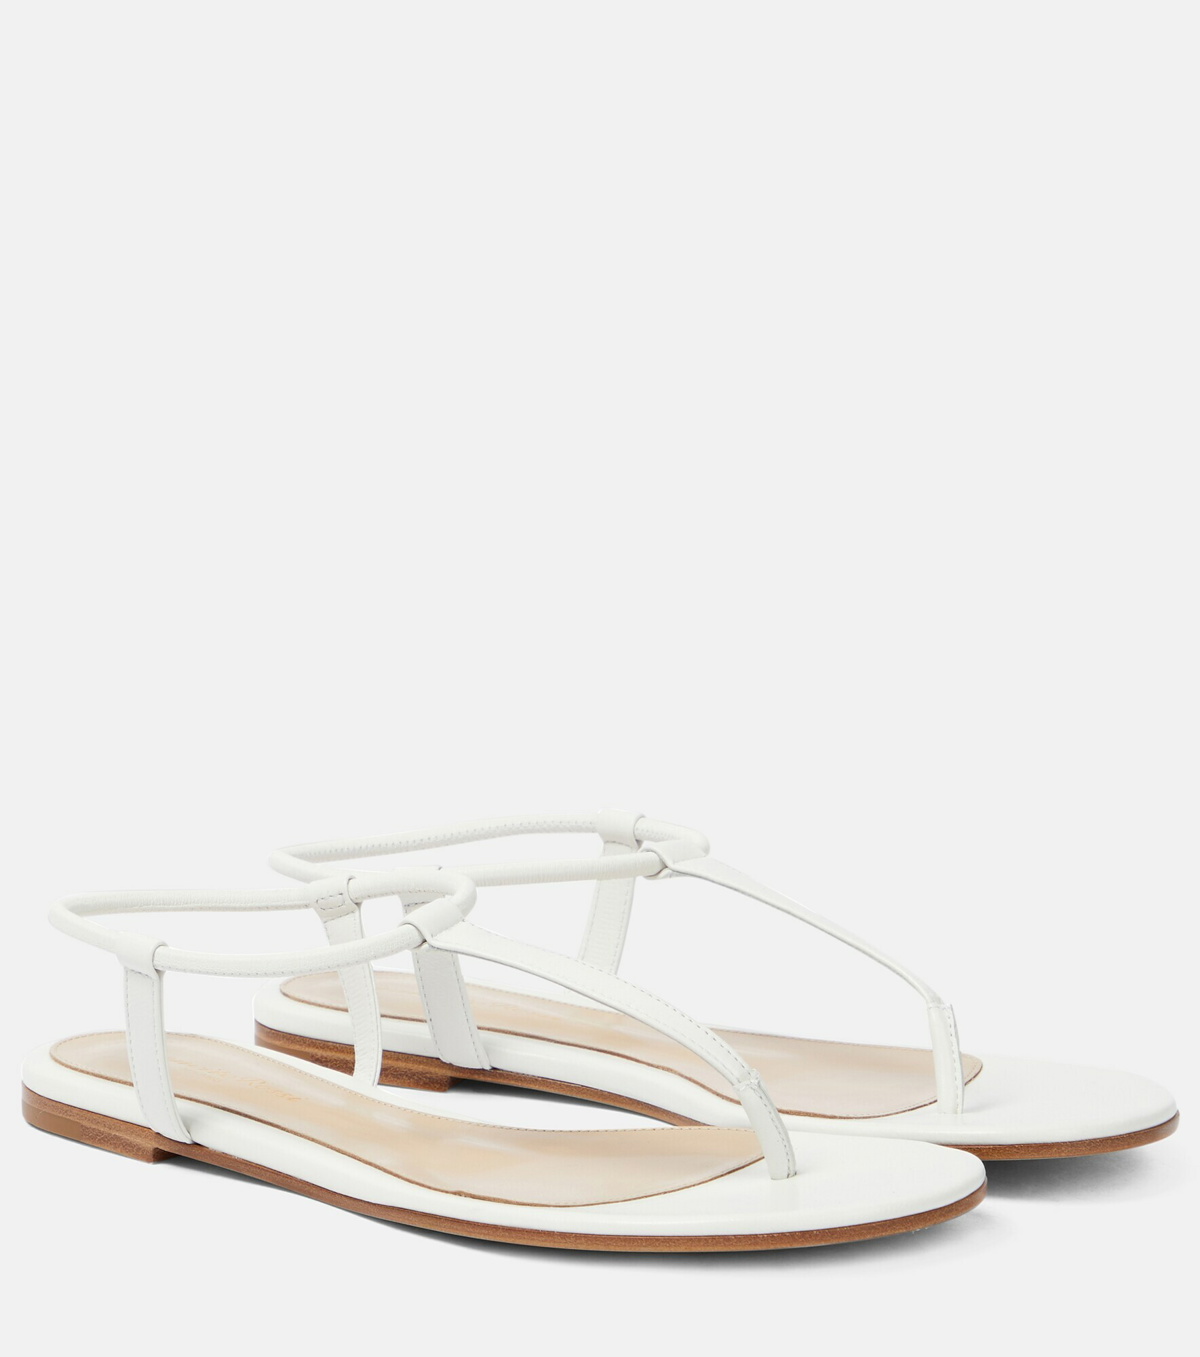 Gianvito Rossi - Jaey leather thong sandals Gianvito Rossi